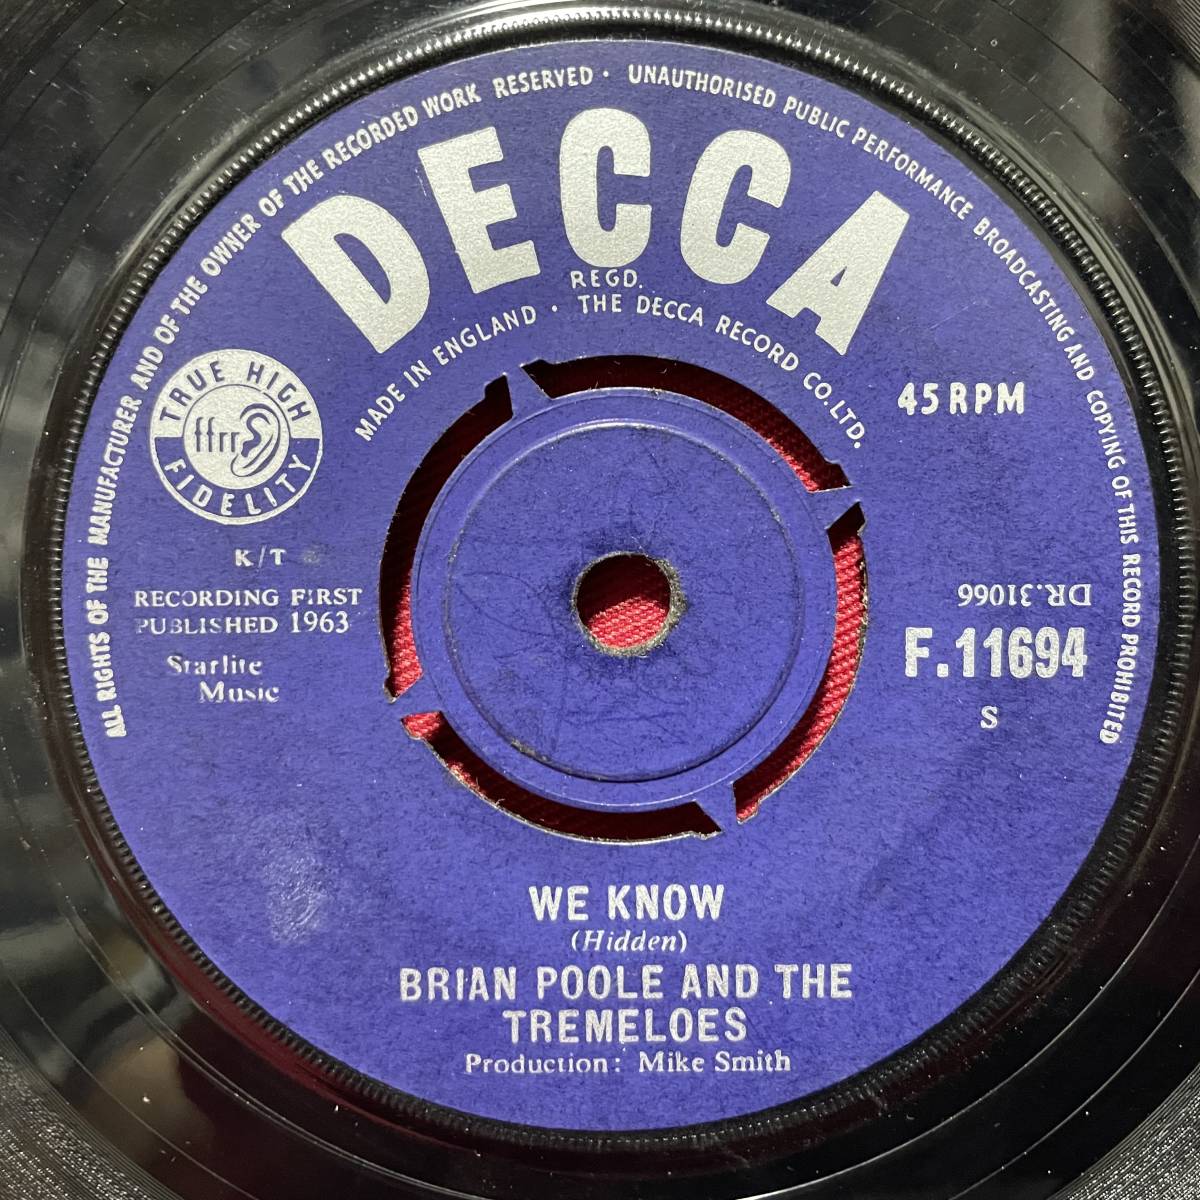 ◆UKorg7”s!◆BRIAN POOLE & THE TREMELOES◆TWIST AND SHOUT◆_画像2